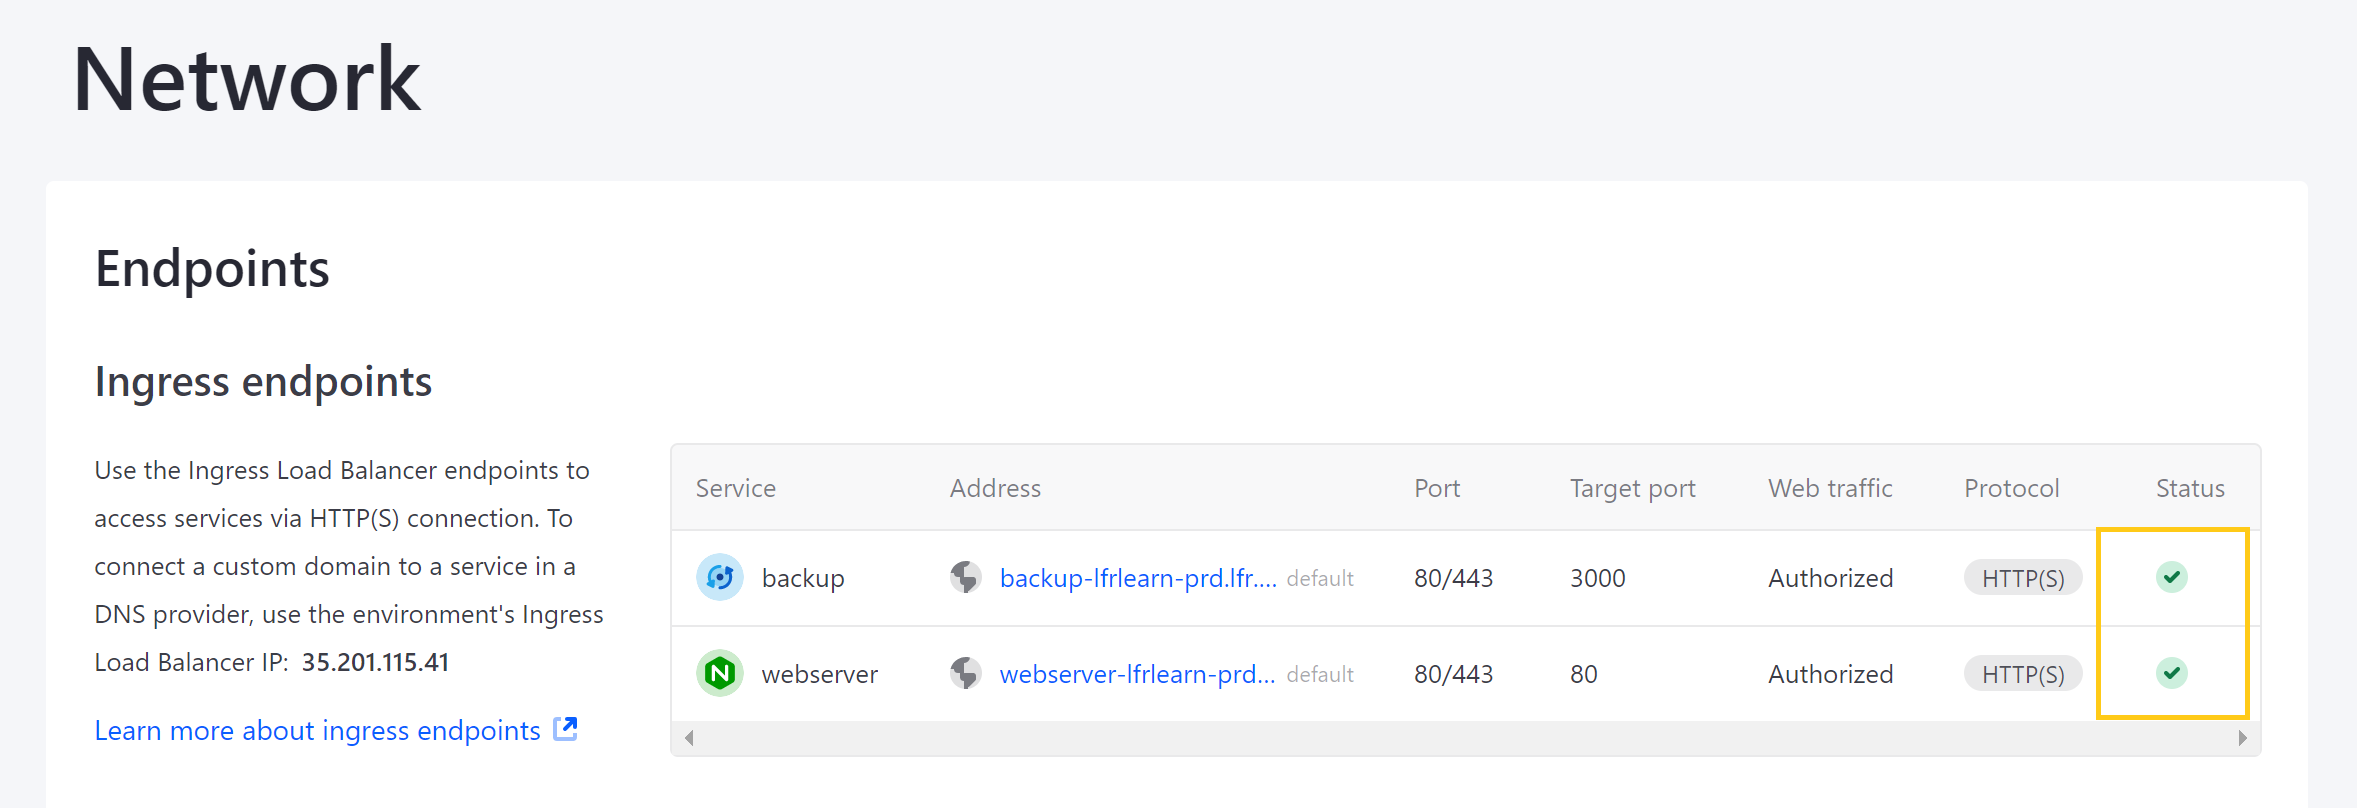 View all your endpoints and custom domains on the Network page.